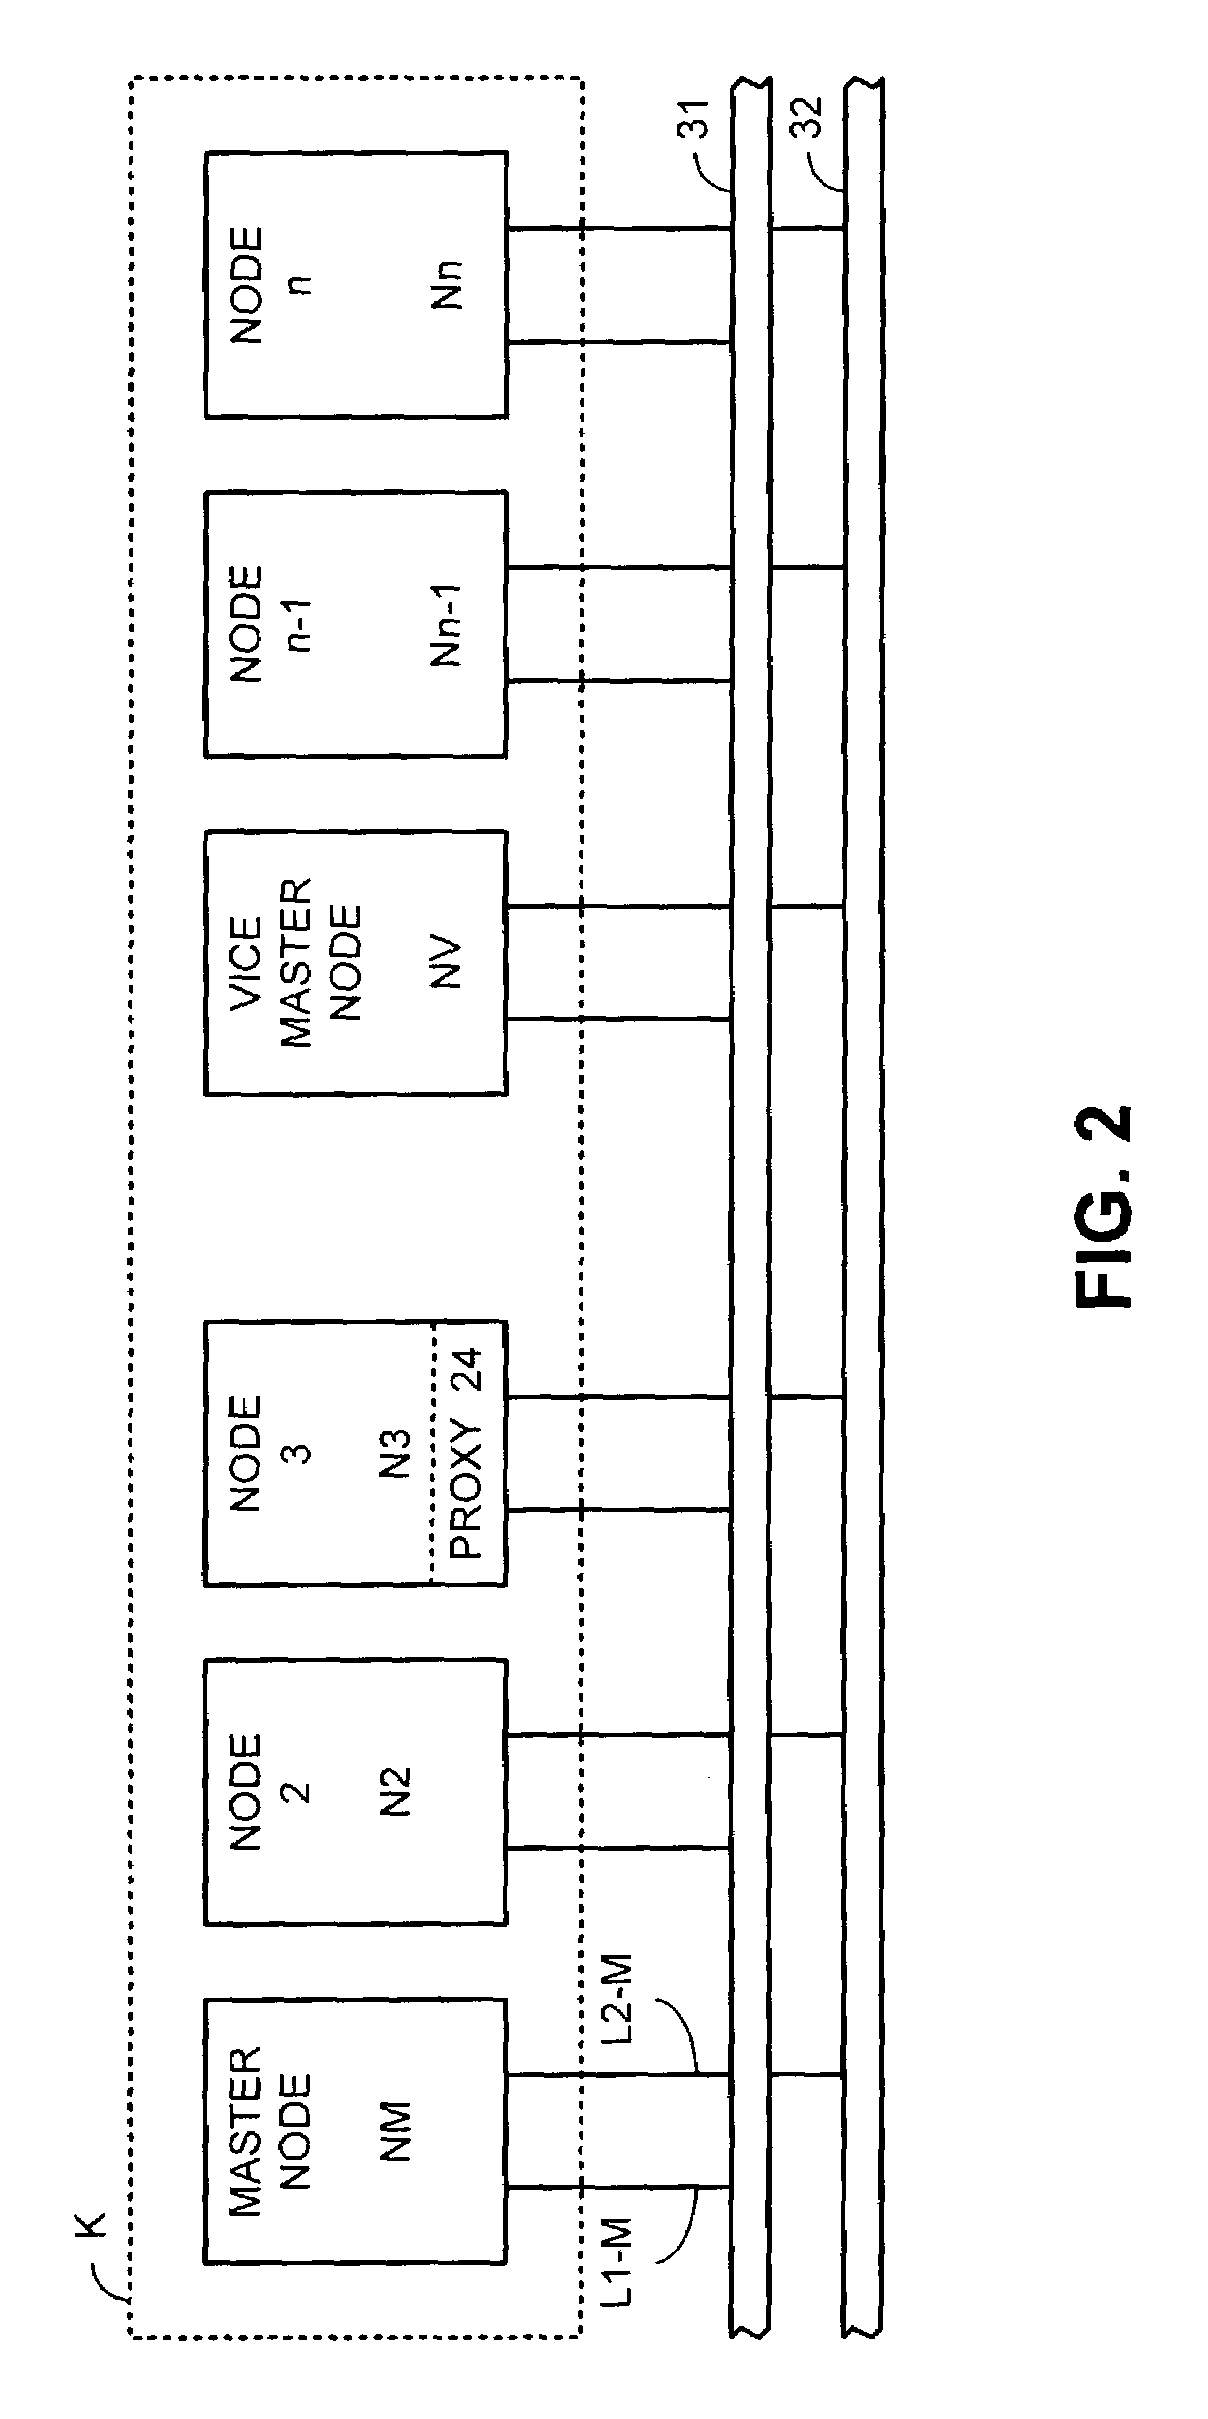 Distributed computer system enhancing a protocol service to a highly available service